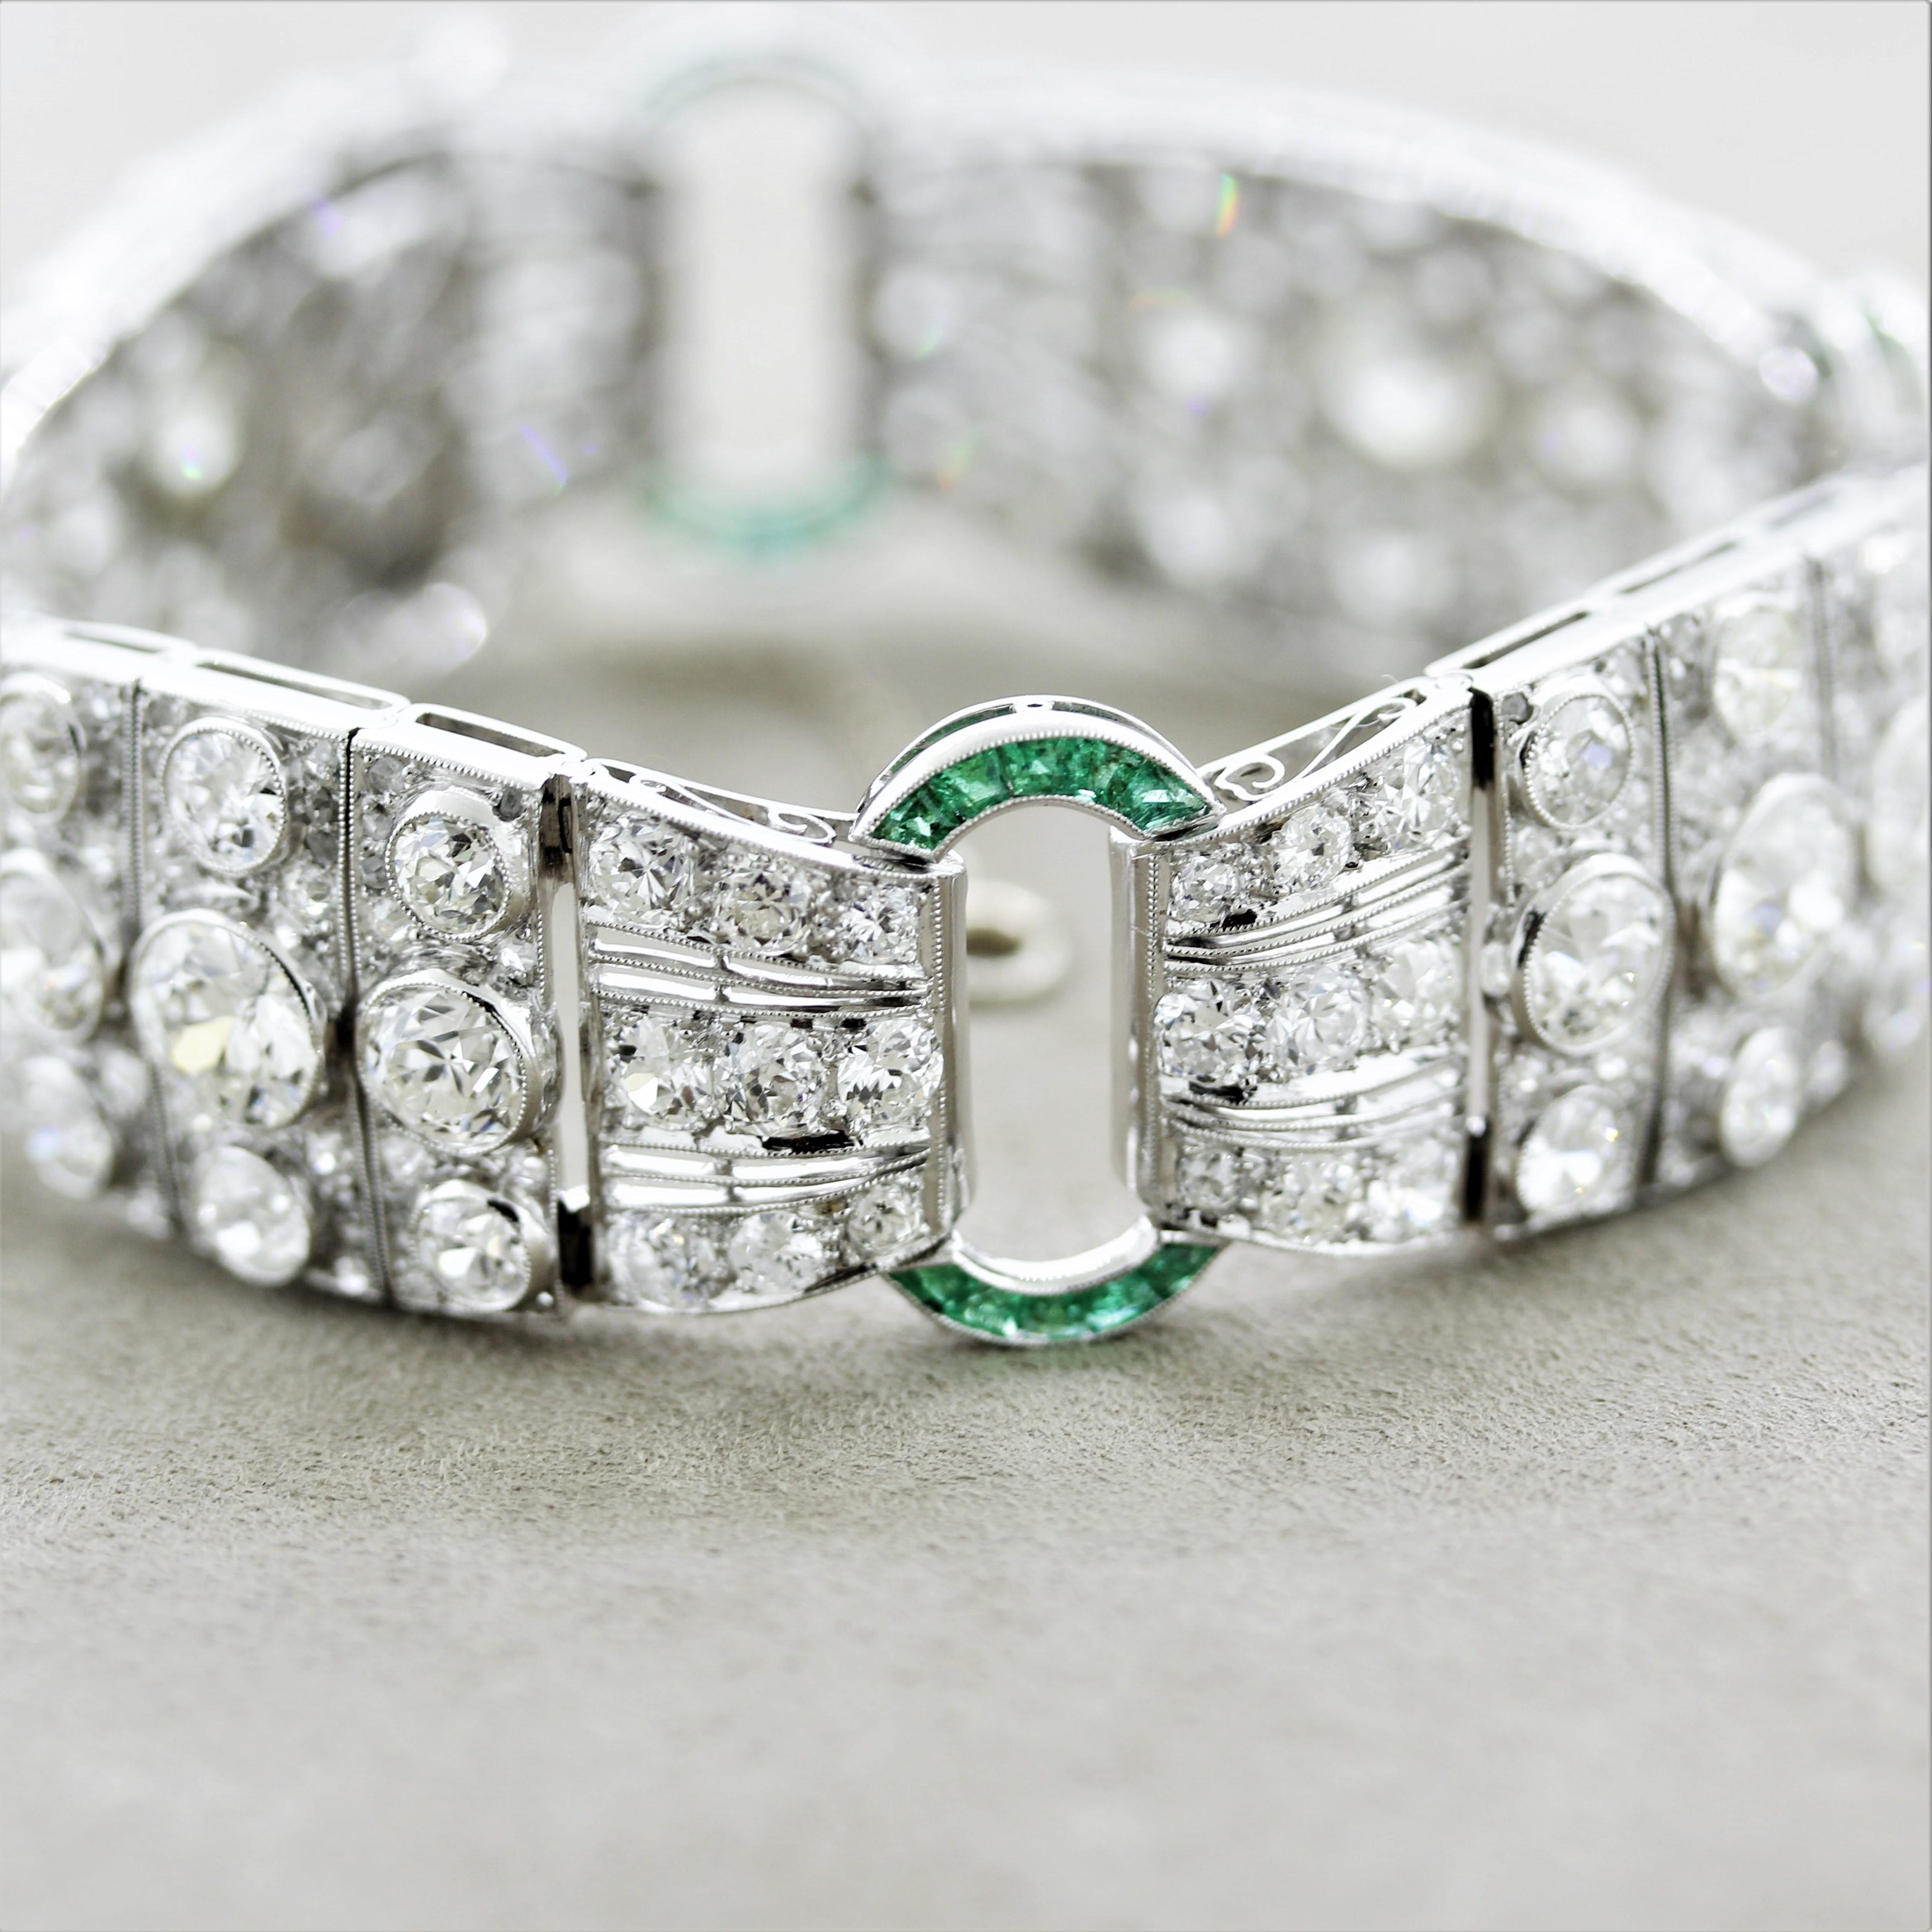 A one of a kind bracelet from the early Art Deco era, Circa 1925. It features an array of larger sized European-cut diamonds, an estimated weight of 30 carats! Four of the largest diamonds weigh north of 1 carat each, really setting this bracelet